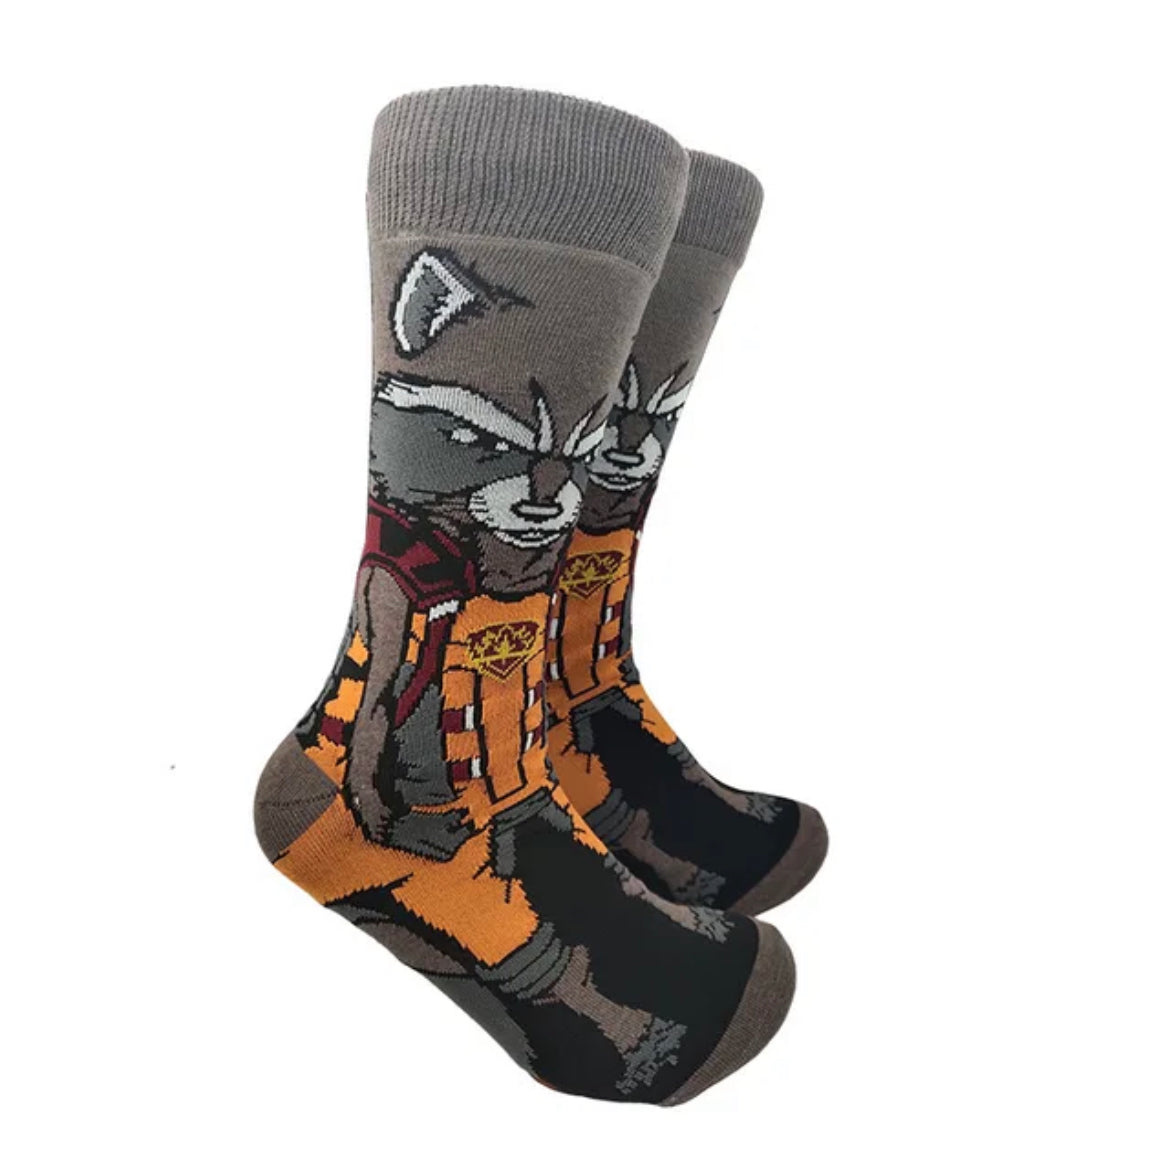 Guardians of the Galaxy Sock